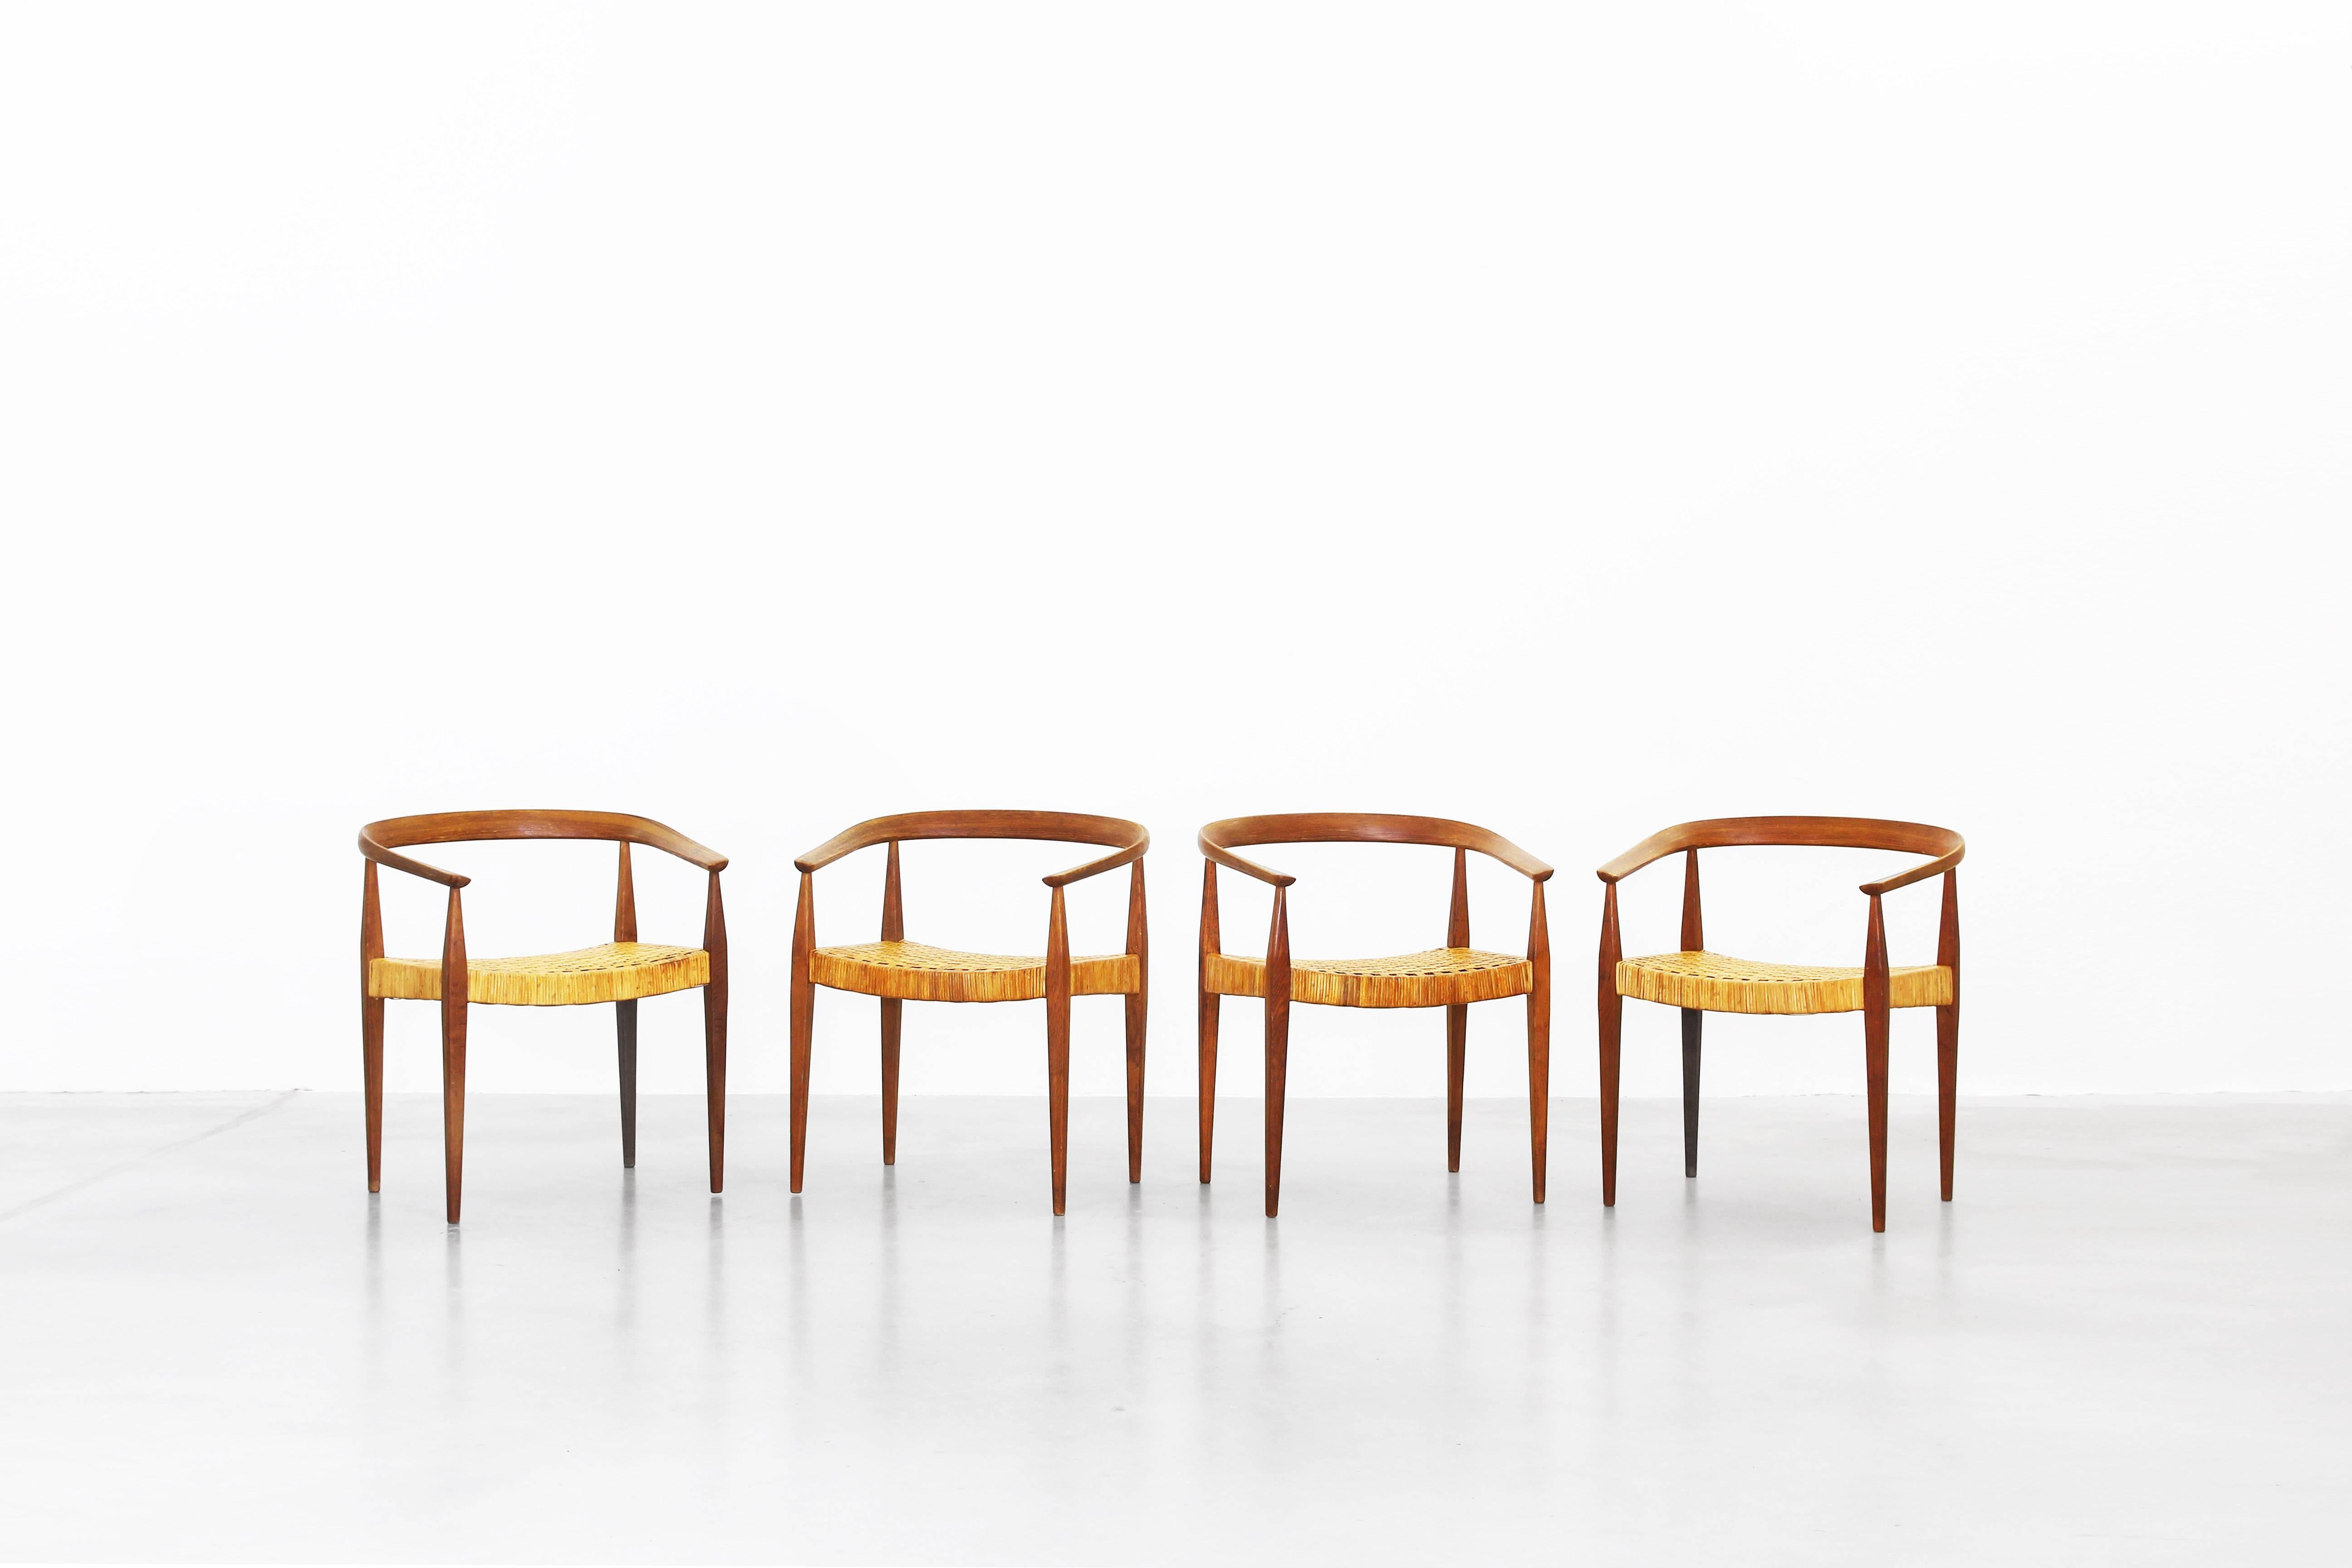 A beautiful set of ten armchairs designed by Nanna Ditzel for Poul Kold Savaerk in 1955, made in Denmark. All chairs come with a great patinated oak and cane and are in an excellent condition with little traces of usage.